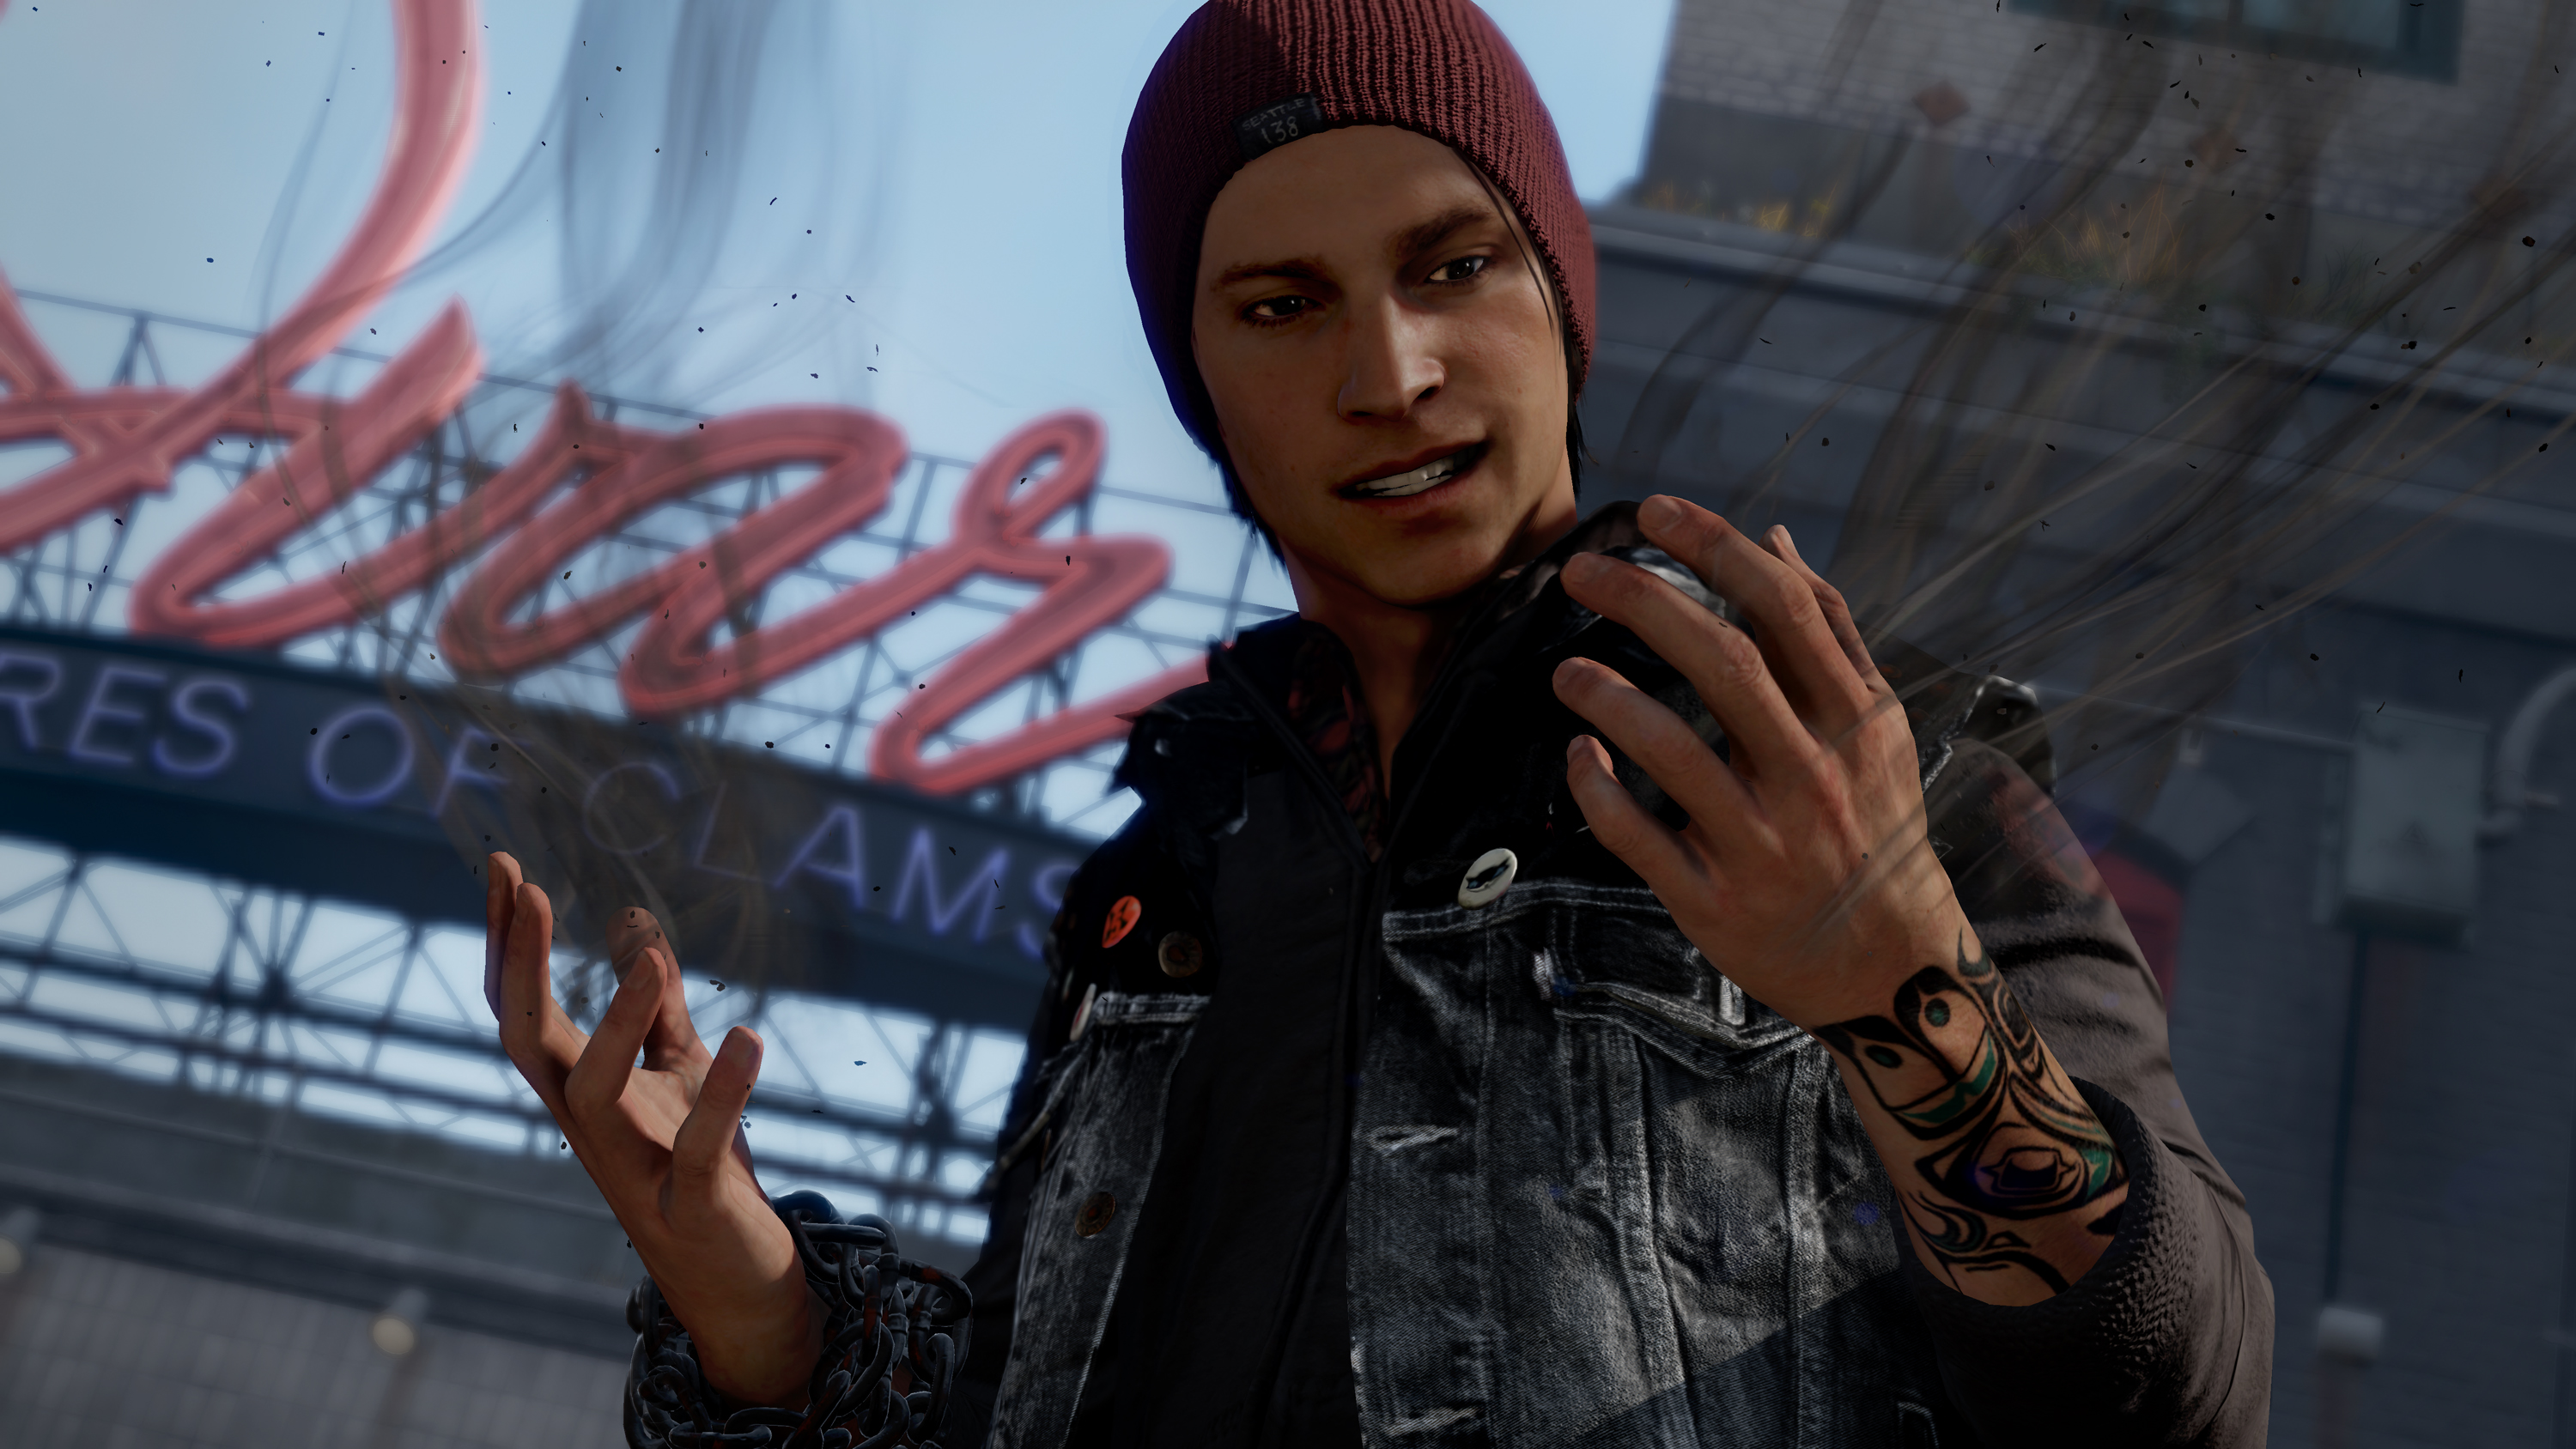 New son son 2. Infamous: second son. Делсин Роу. Инфеймос Делсин. Infamous second son Делсин.